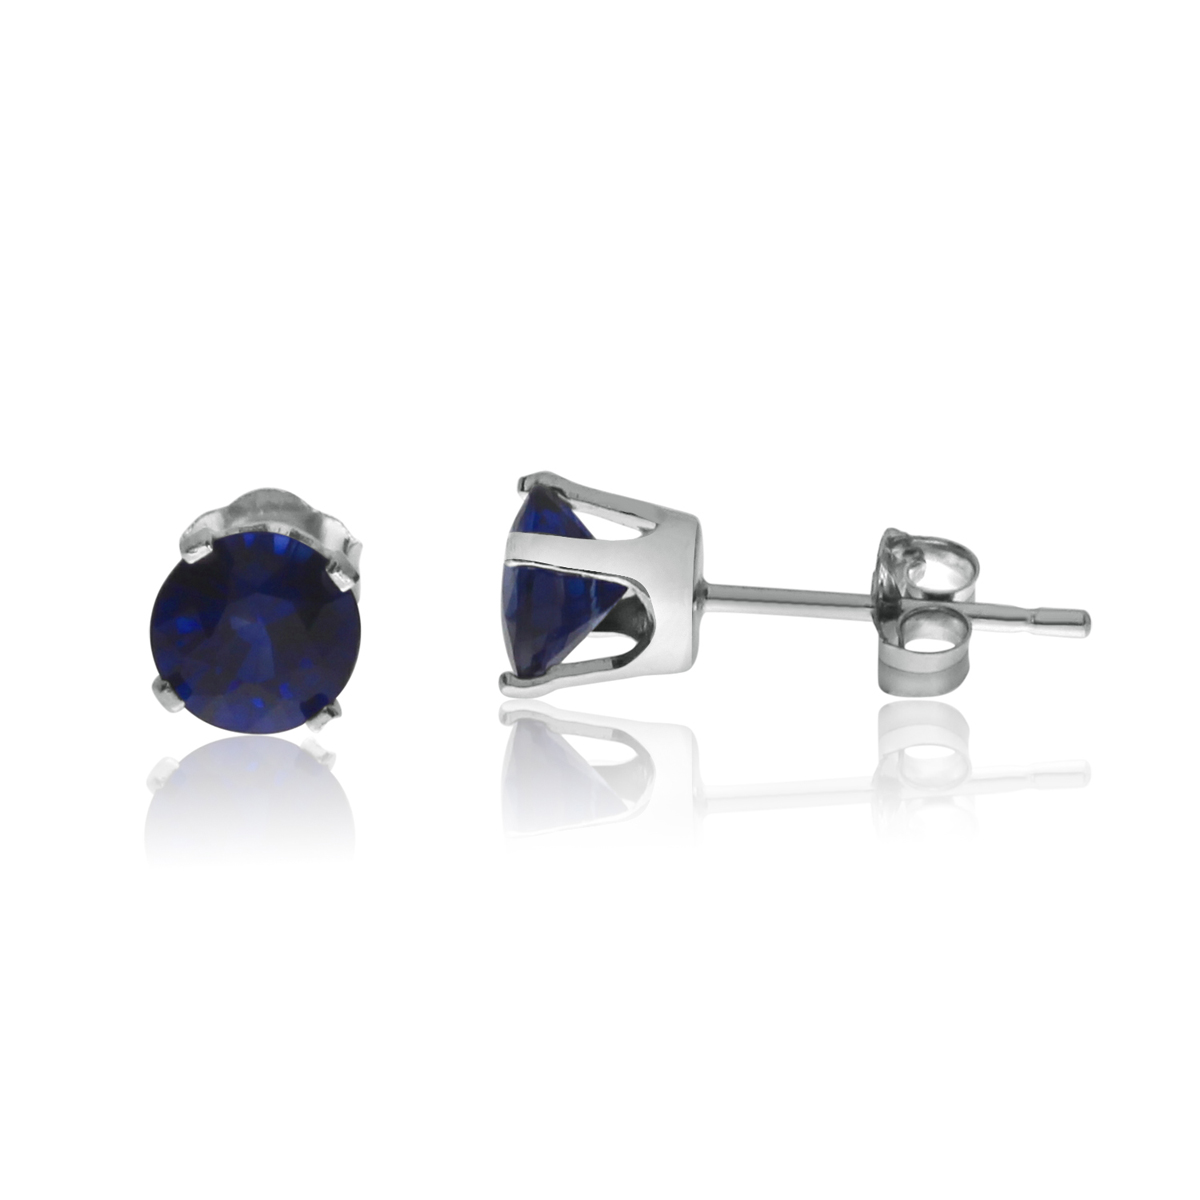 14K White Gold 5mm Diffused Sapphire Birthstone Earrings